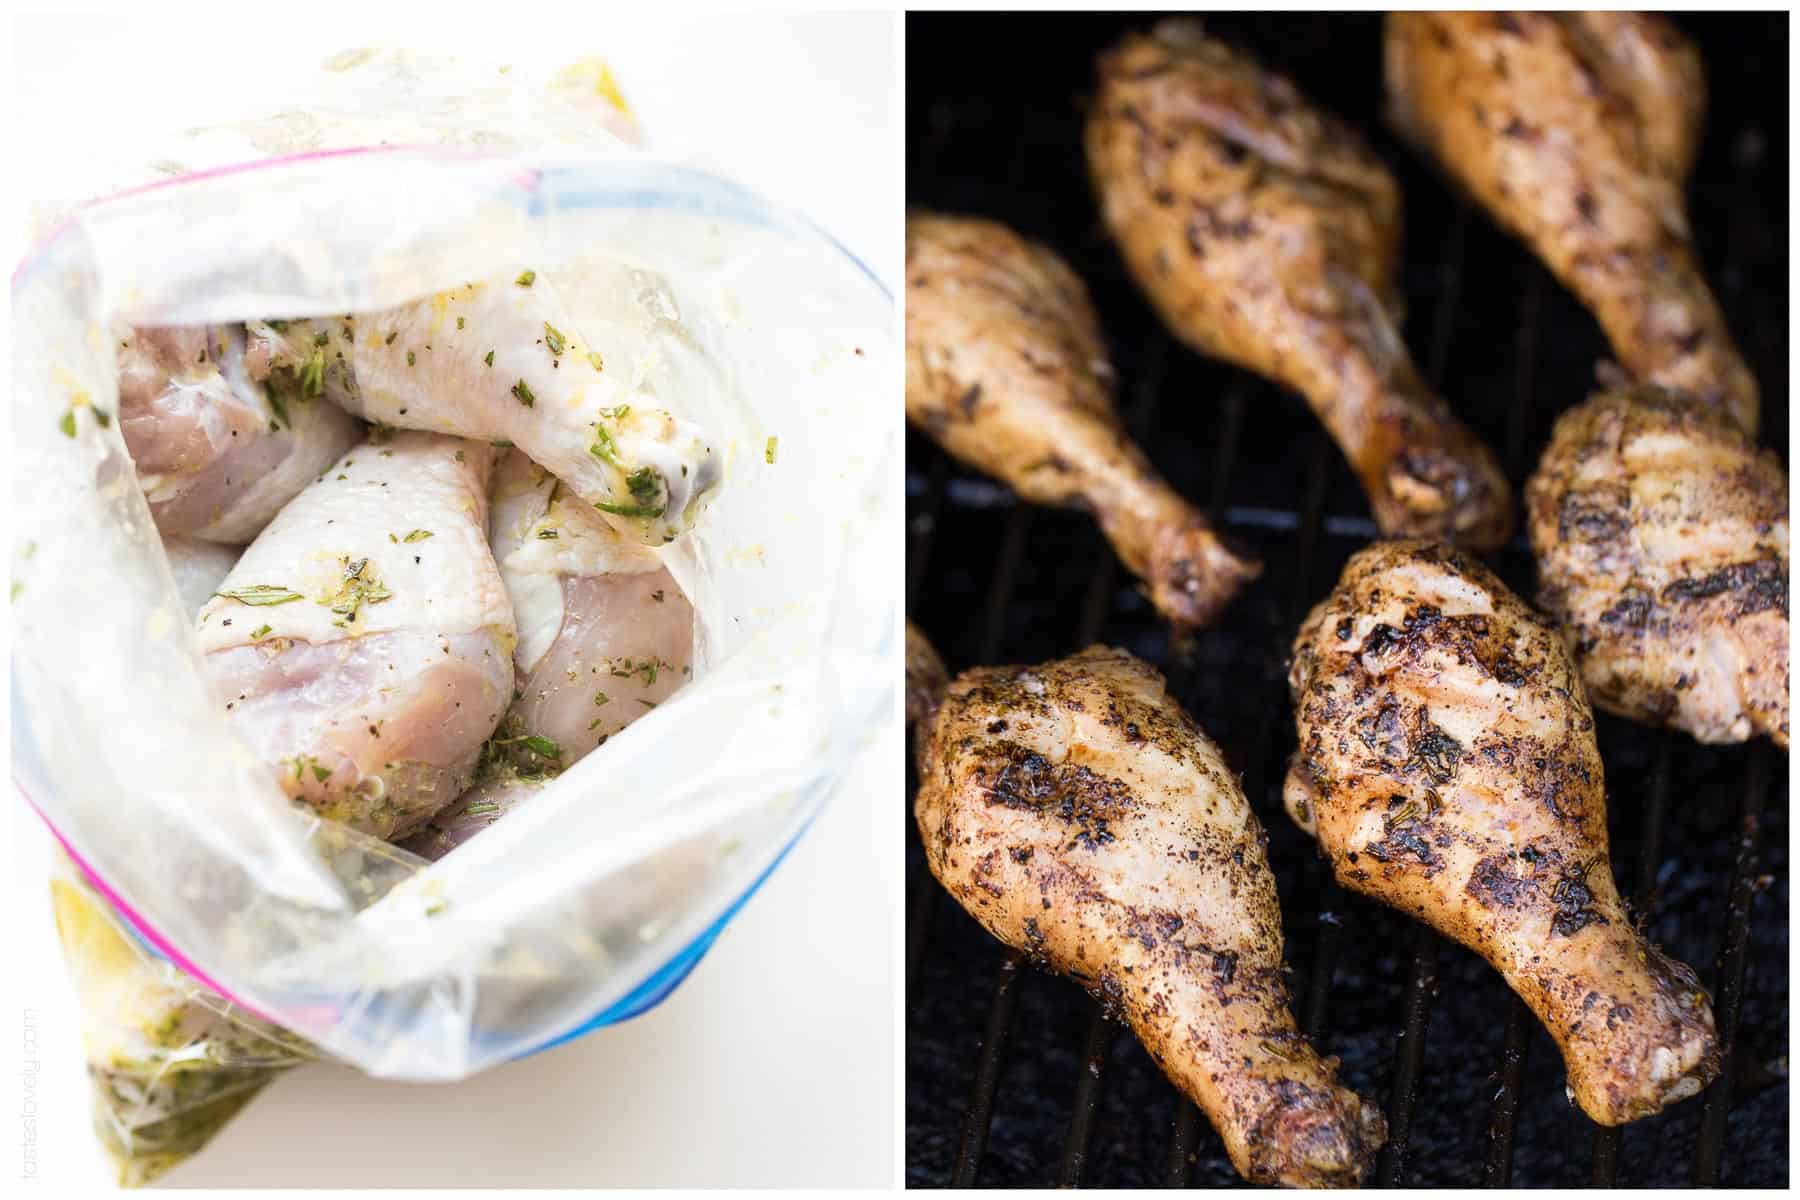 Paleo & Whole30 Lemon Herb Grilled Chicken Drumsticks - a simple and healthy dinner recipe! (gluten free, dairy free, sugar free, grain free, clean eating, low carb)